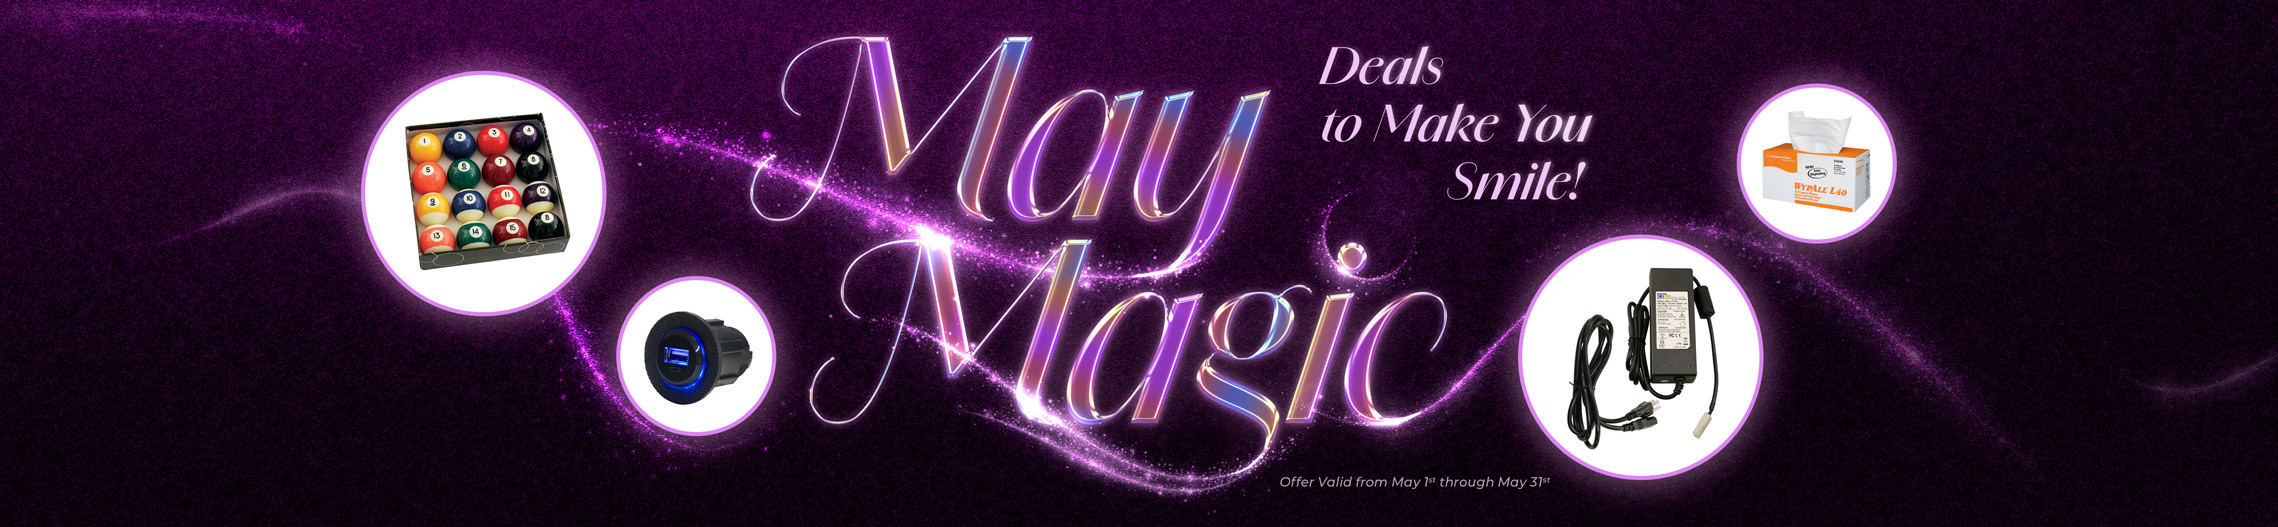 May Magic: Deals To Make You Smile!